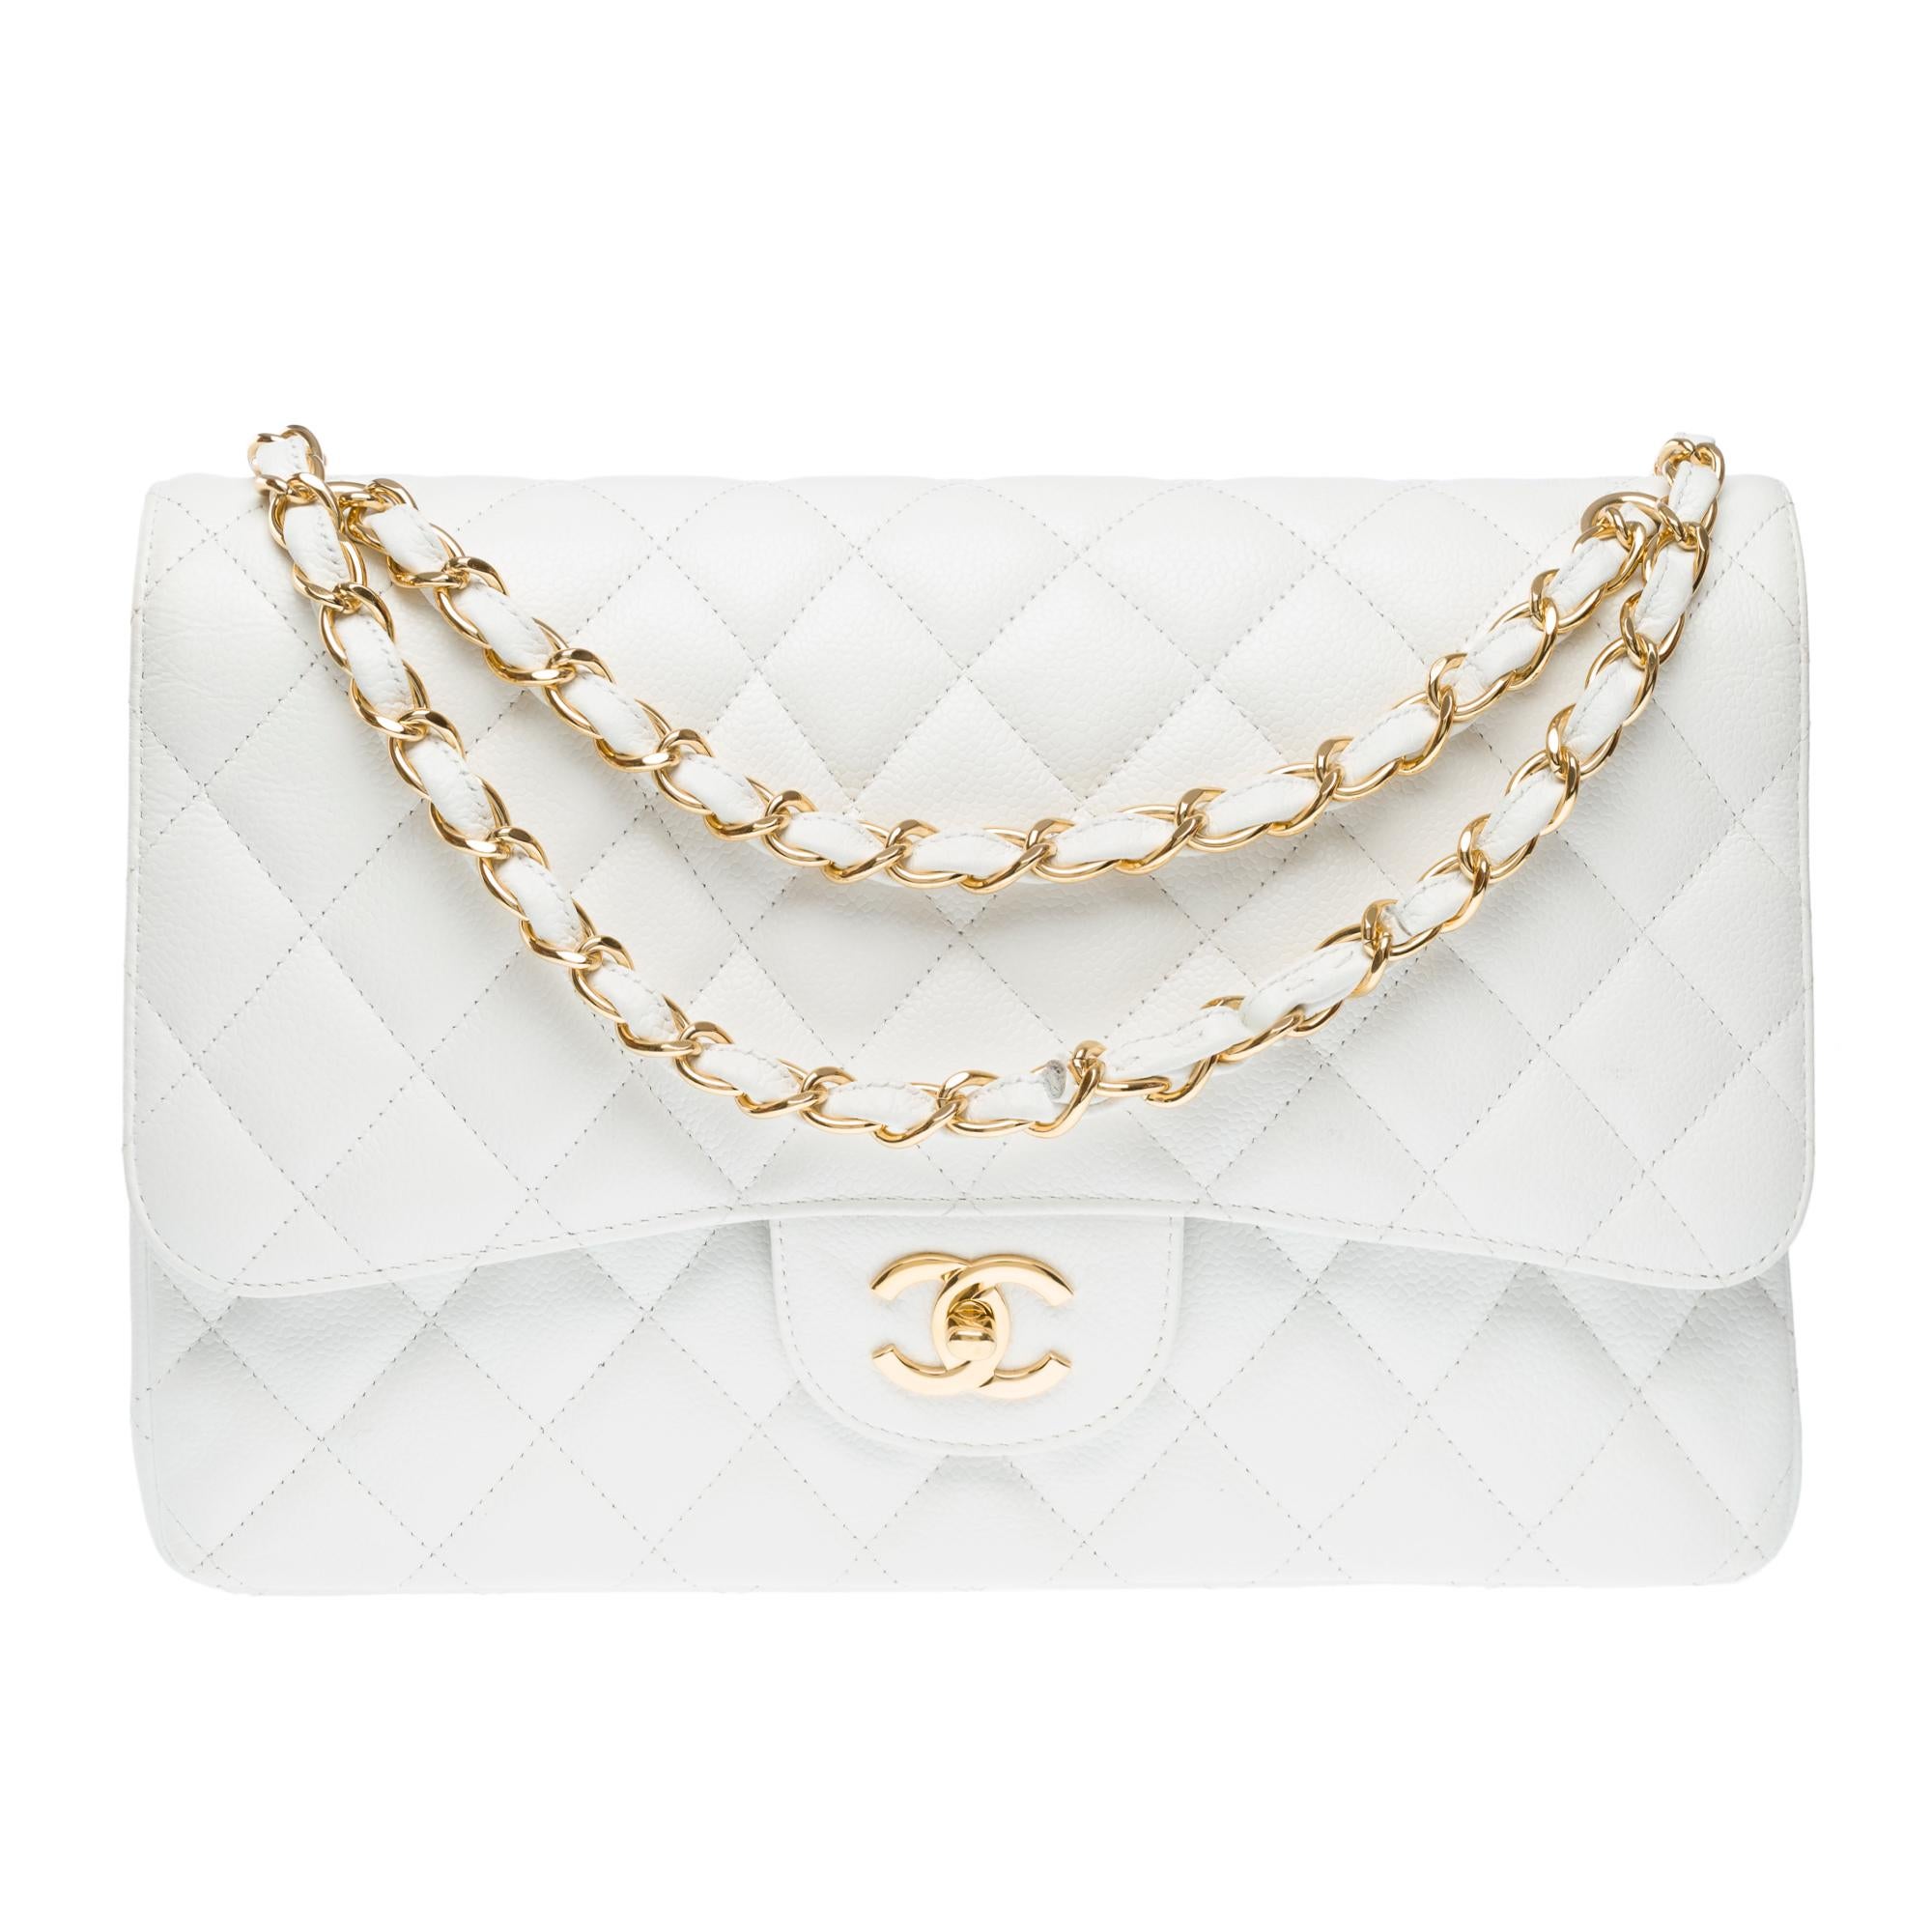 Majestic​ ​Chanel​ ​Timeless​ ​Jumbo​ ​double​ ​flap​ ​shoulder​ ​bag​ ​in​ ​white​ ​caviar​ ​leather,​ ​gold​ ​metal​ ​trim,​ ​a​ ​chain​ ​handle​ ​in​ ​gold​ ​metal​ ​interlaced​ ​with​ ​white​ ​leather​ ​for​ ​hand​ ​or​ ​shoulder​ ​or​